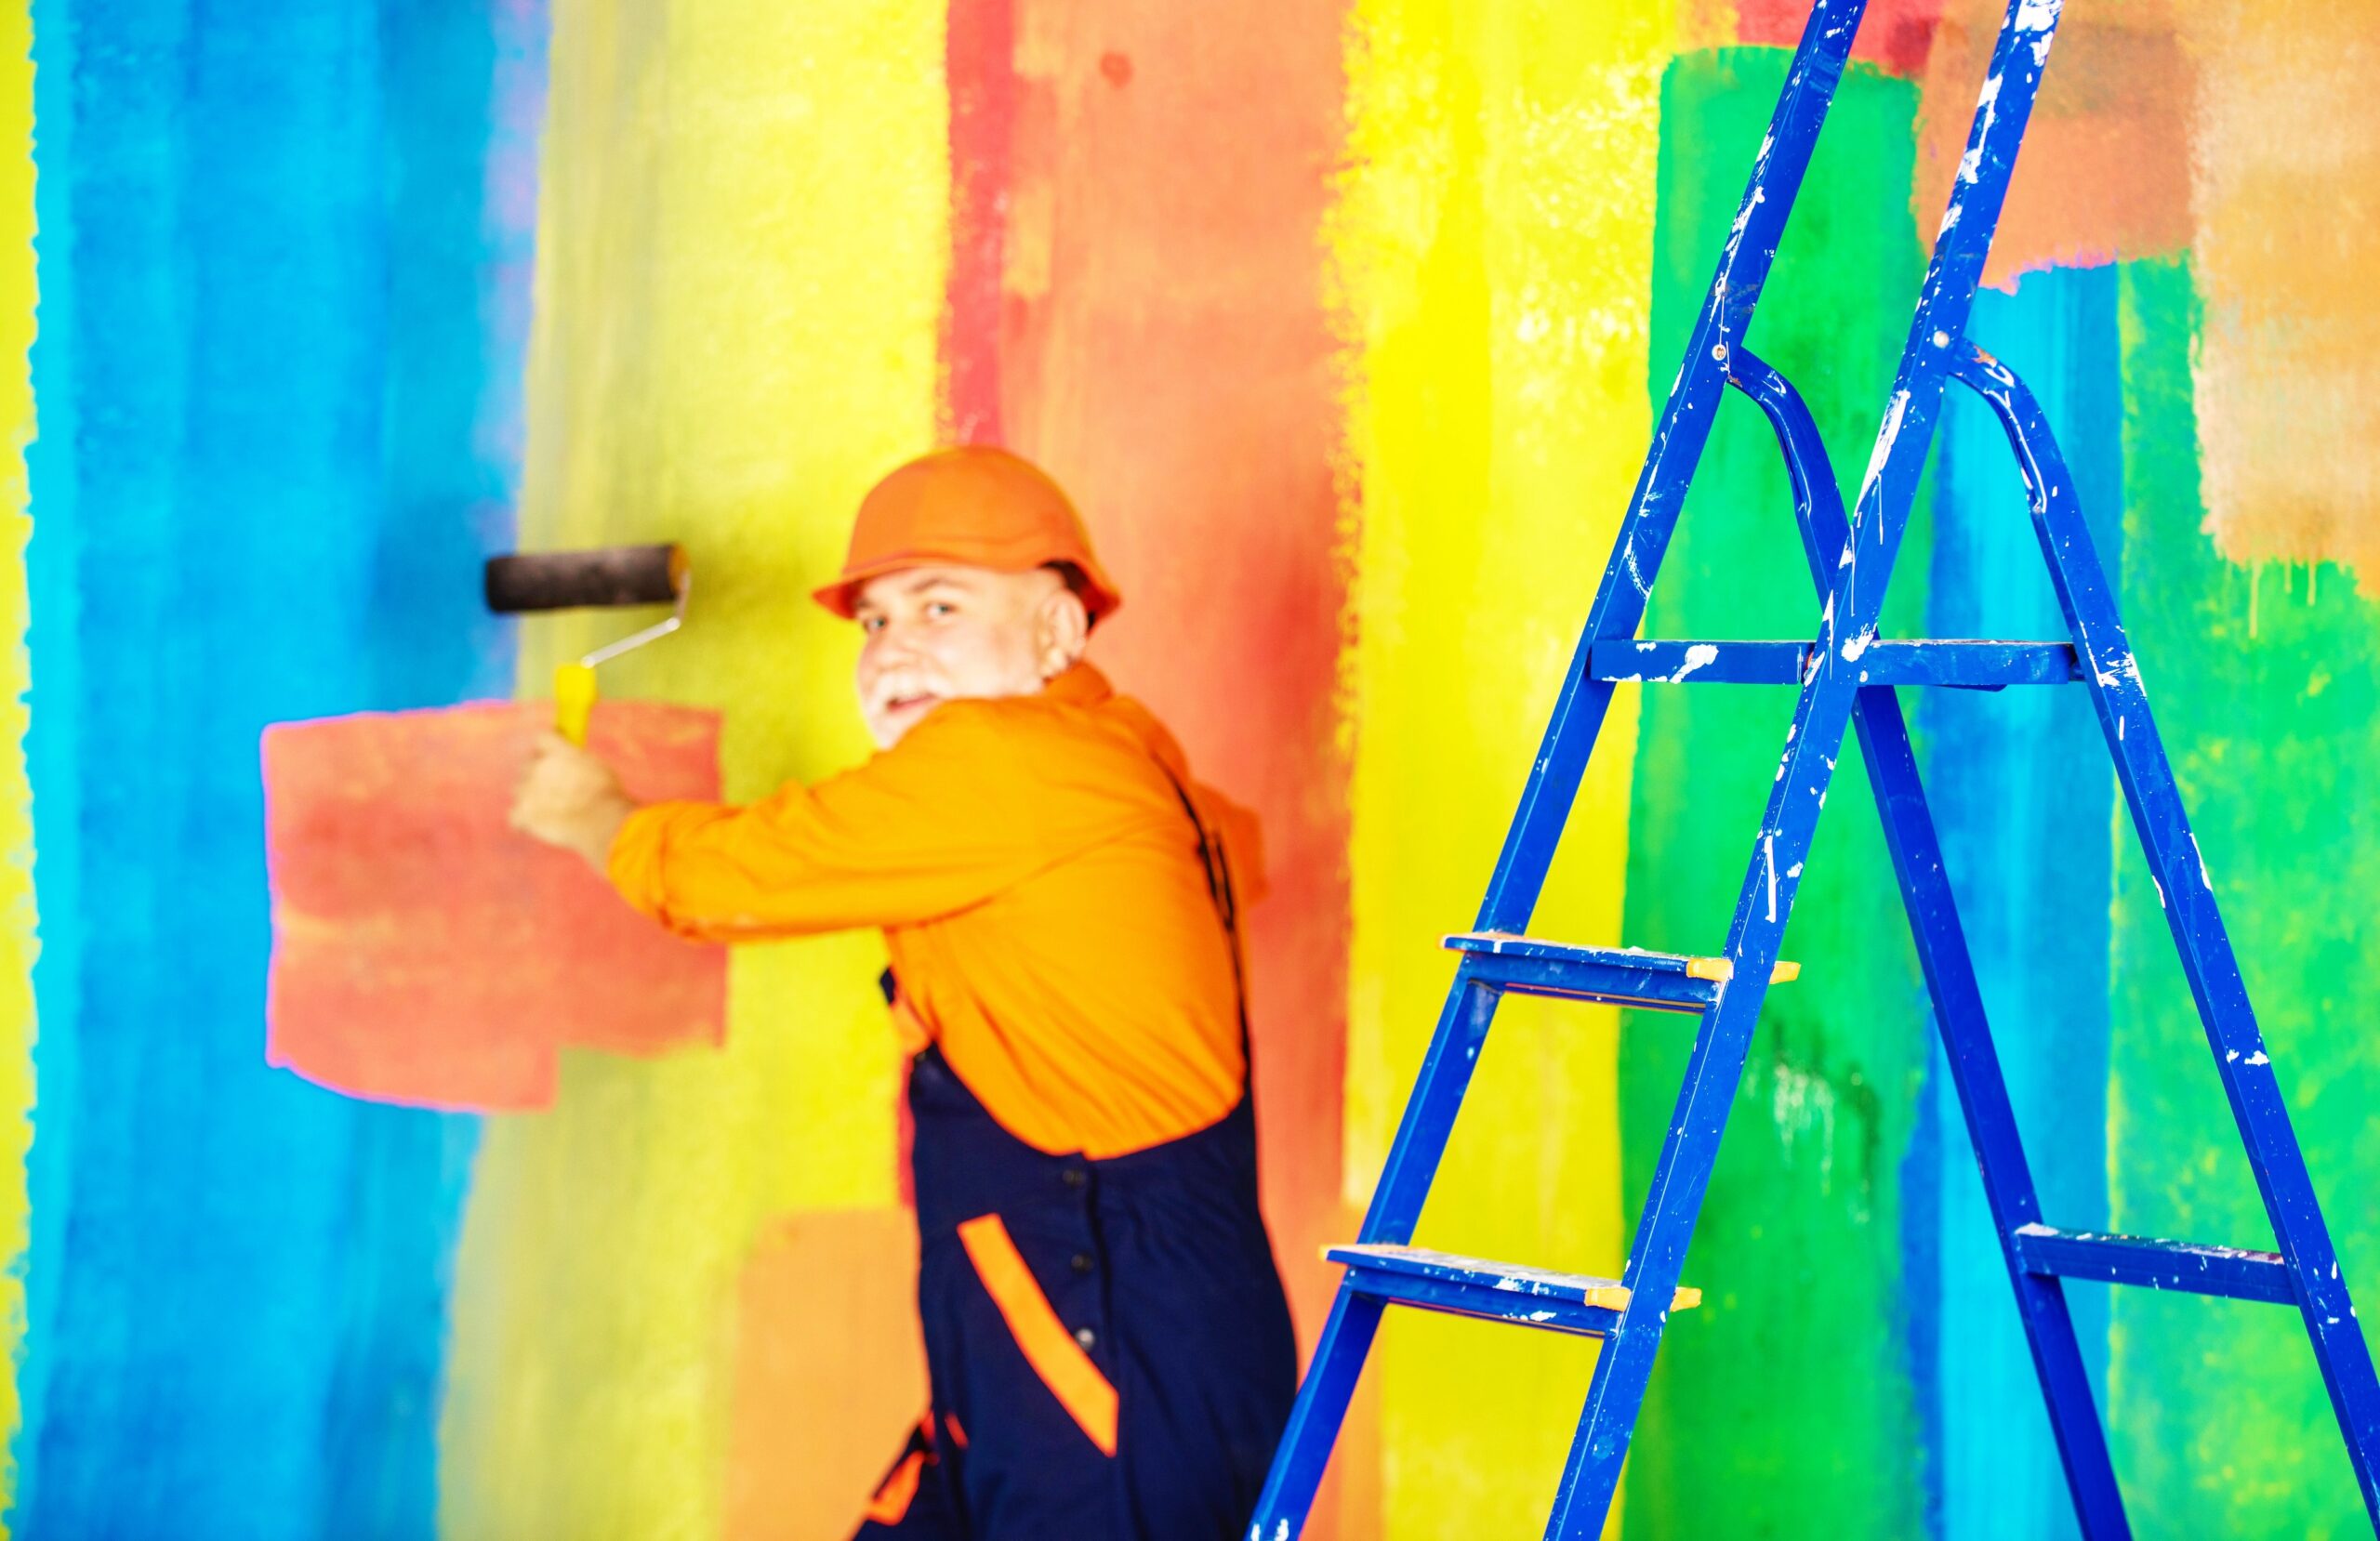 <img src="person.jpg" alt="Person painting a rainbow wall"/>